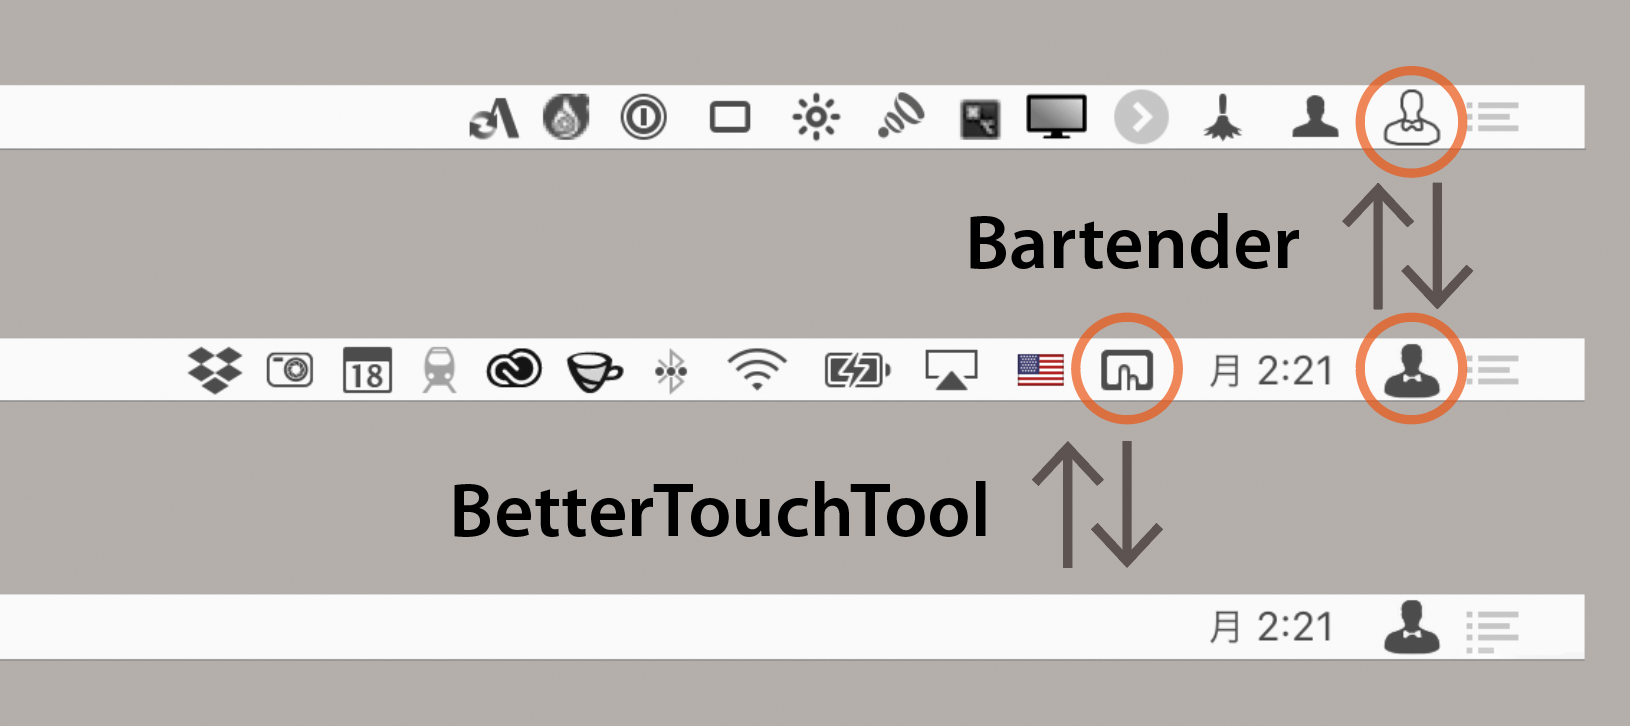 bettertouchtool hide menu icons